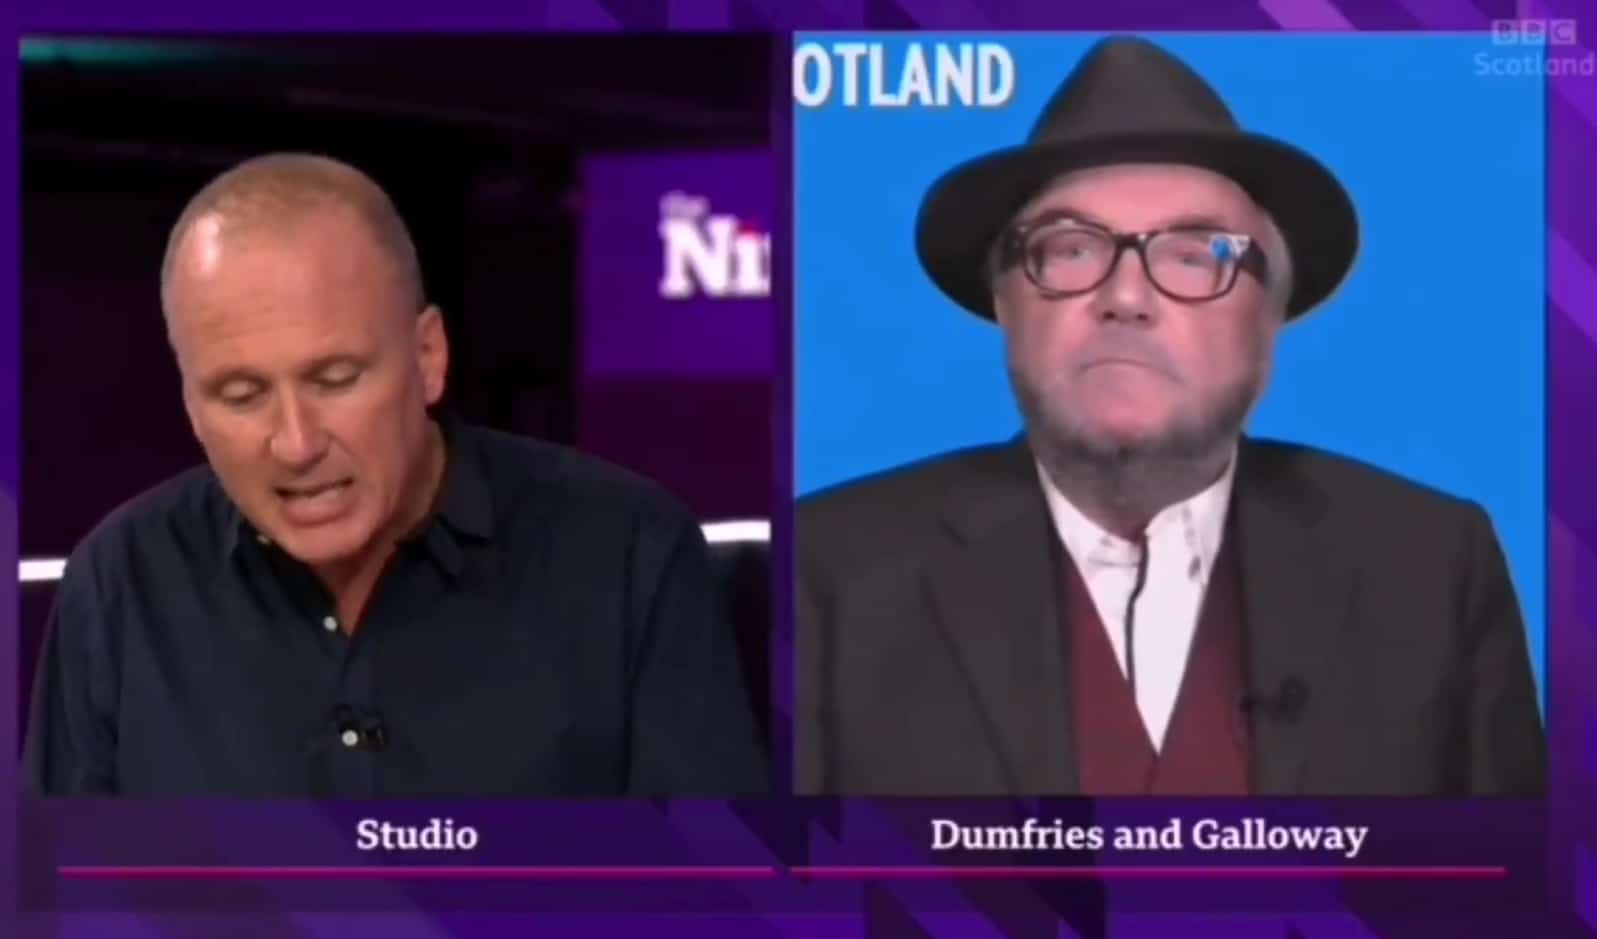 ‘You are strangely animated for a BBC presenter’: George Galloway interview descends into chaos